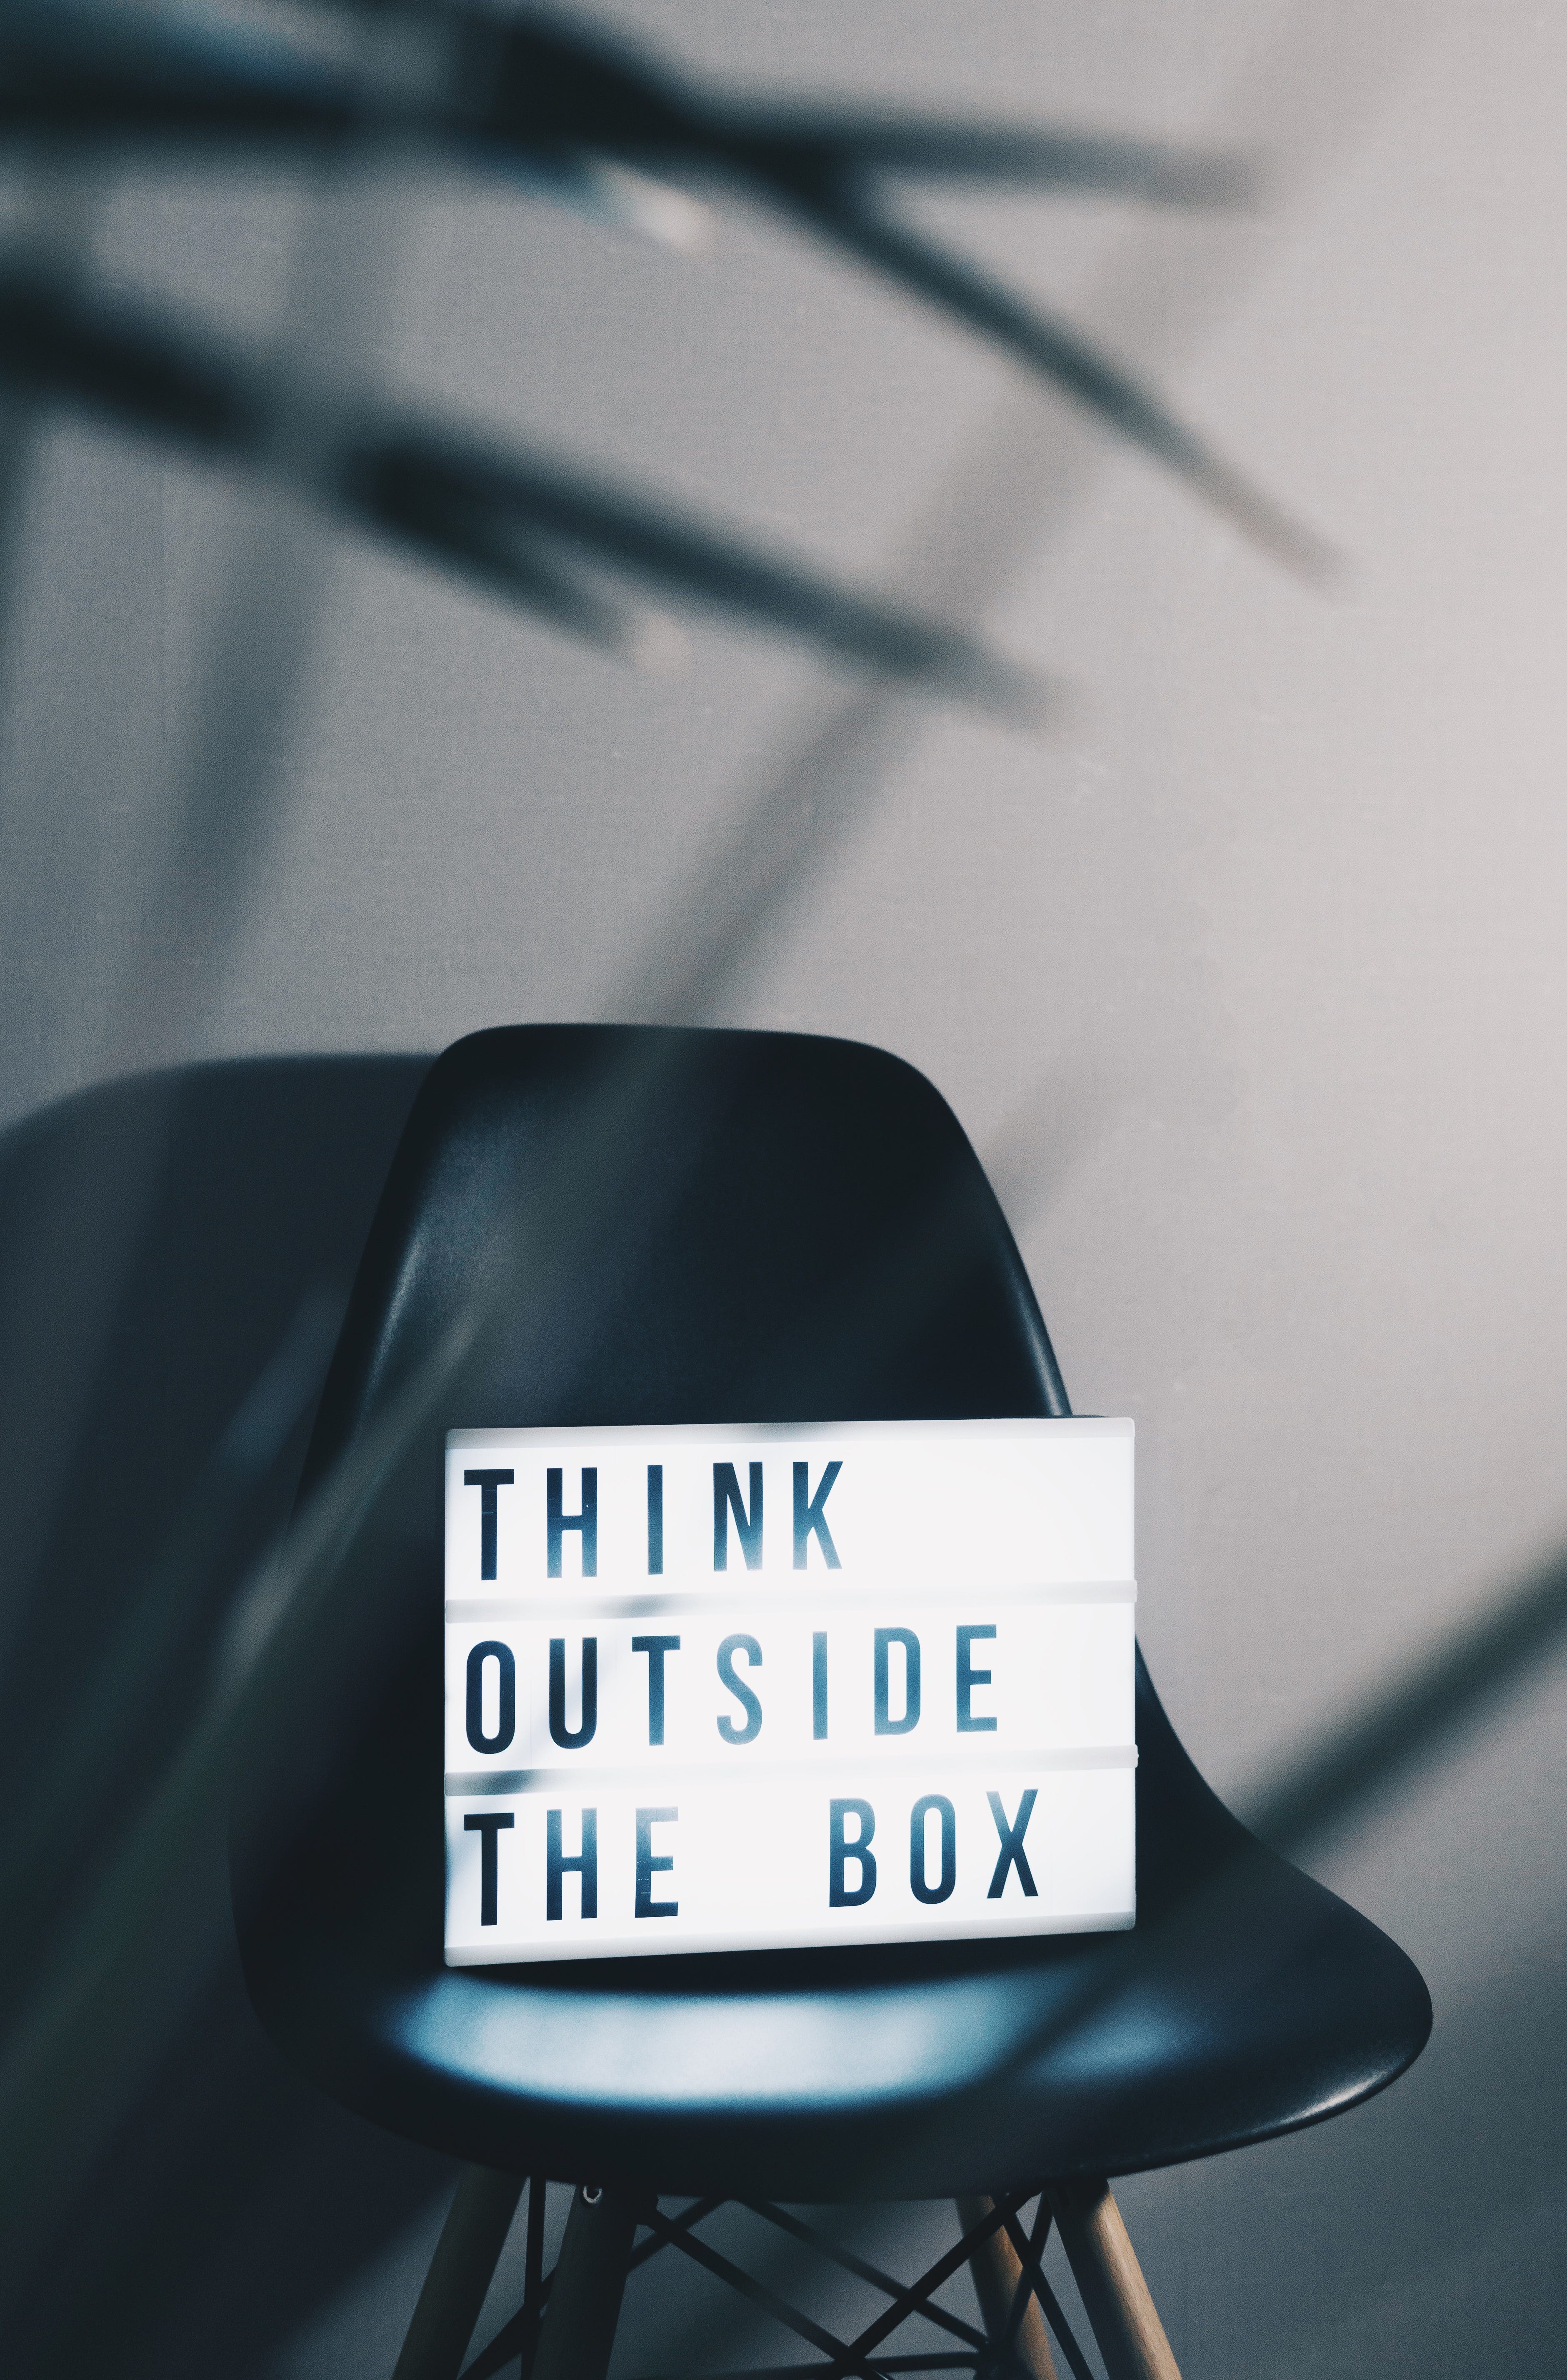 A sign that reads “Think outside the box.”